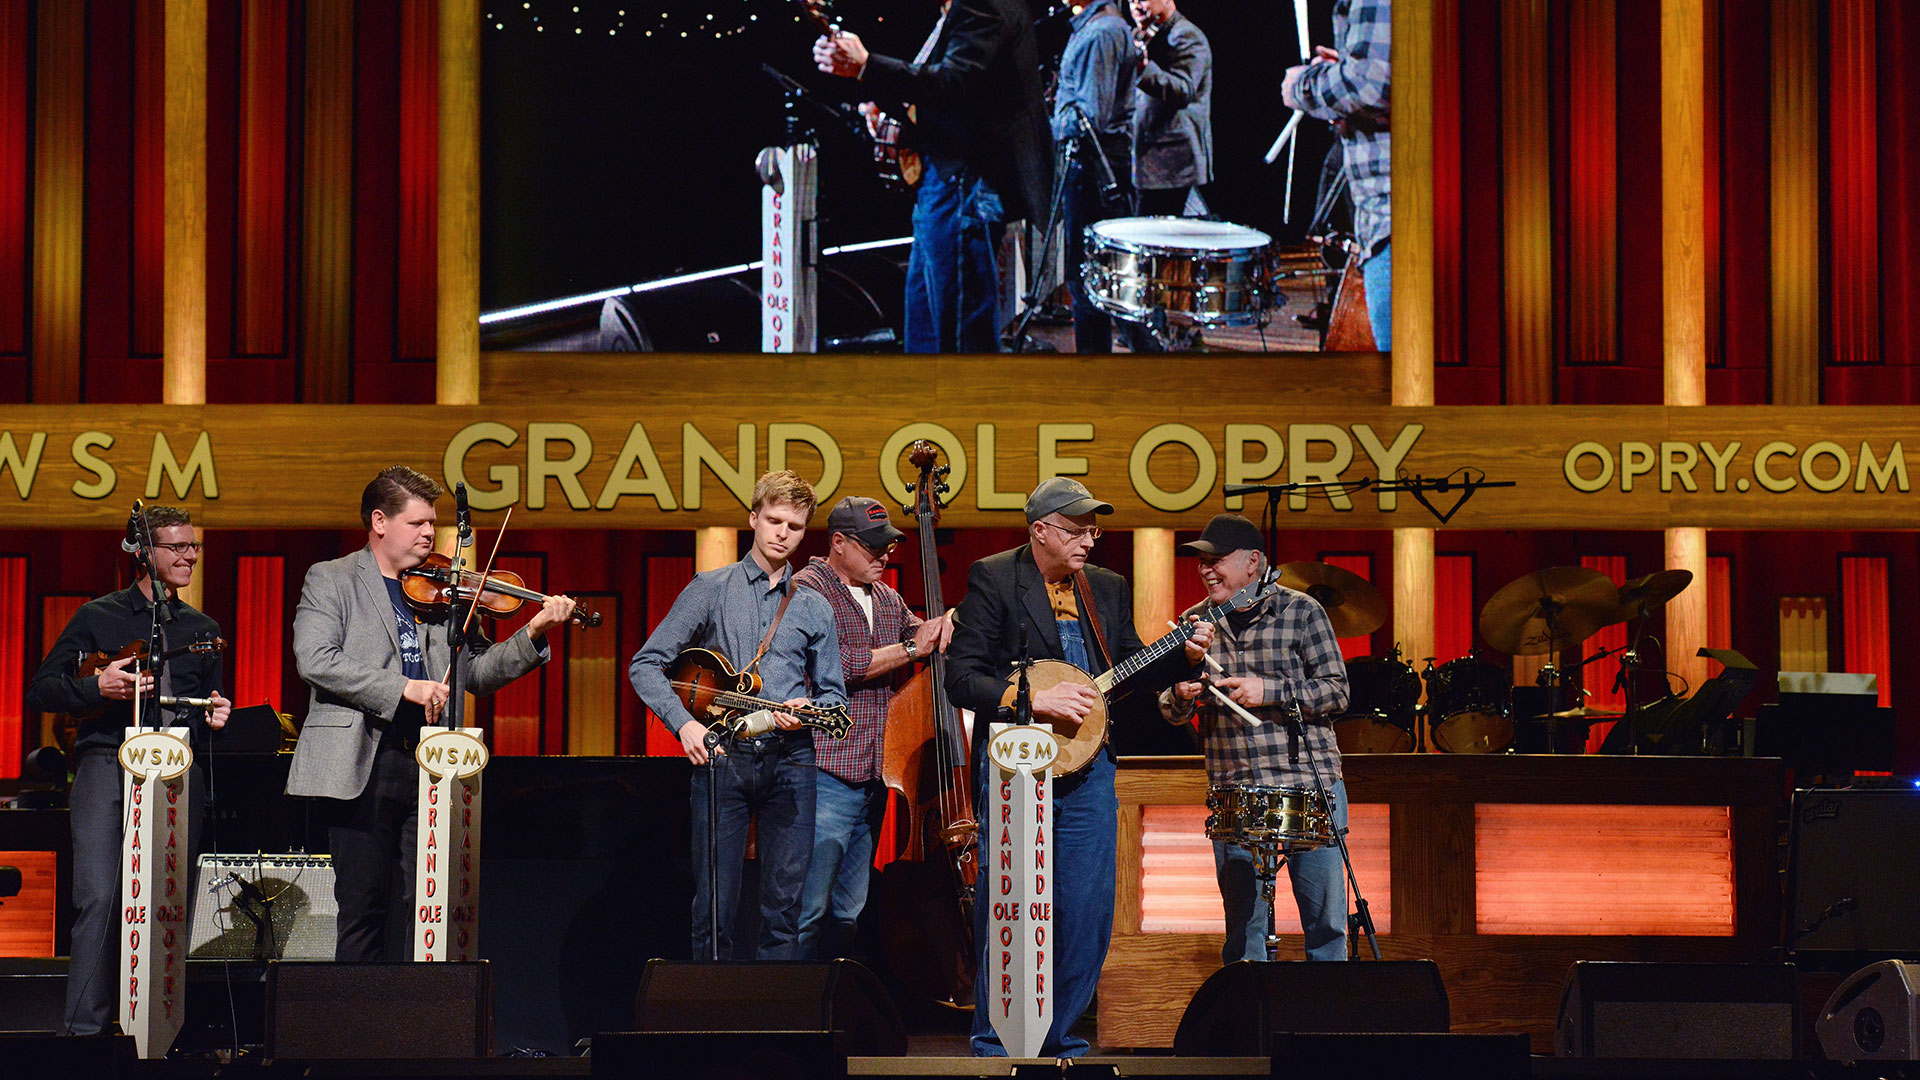 Concert at Grand Ole Opry